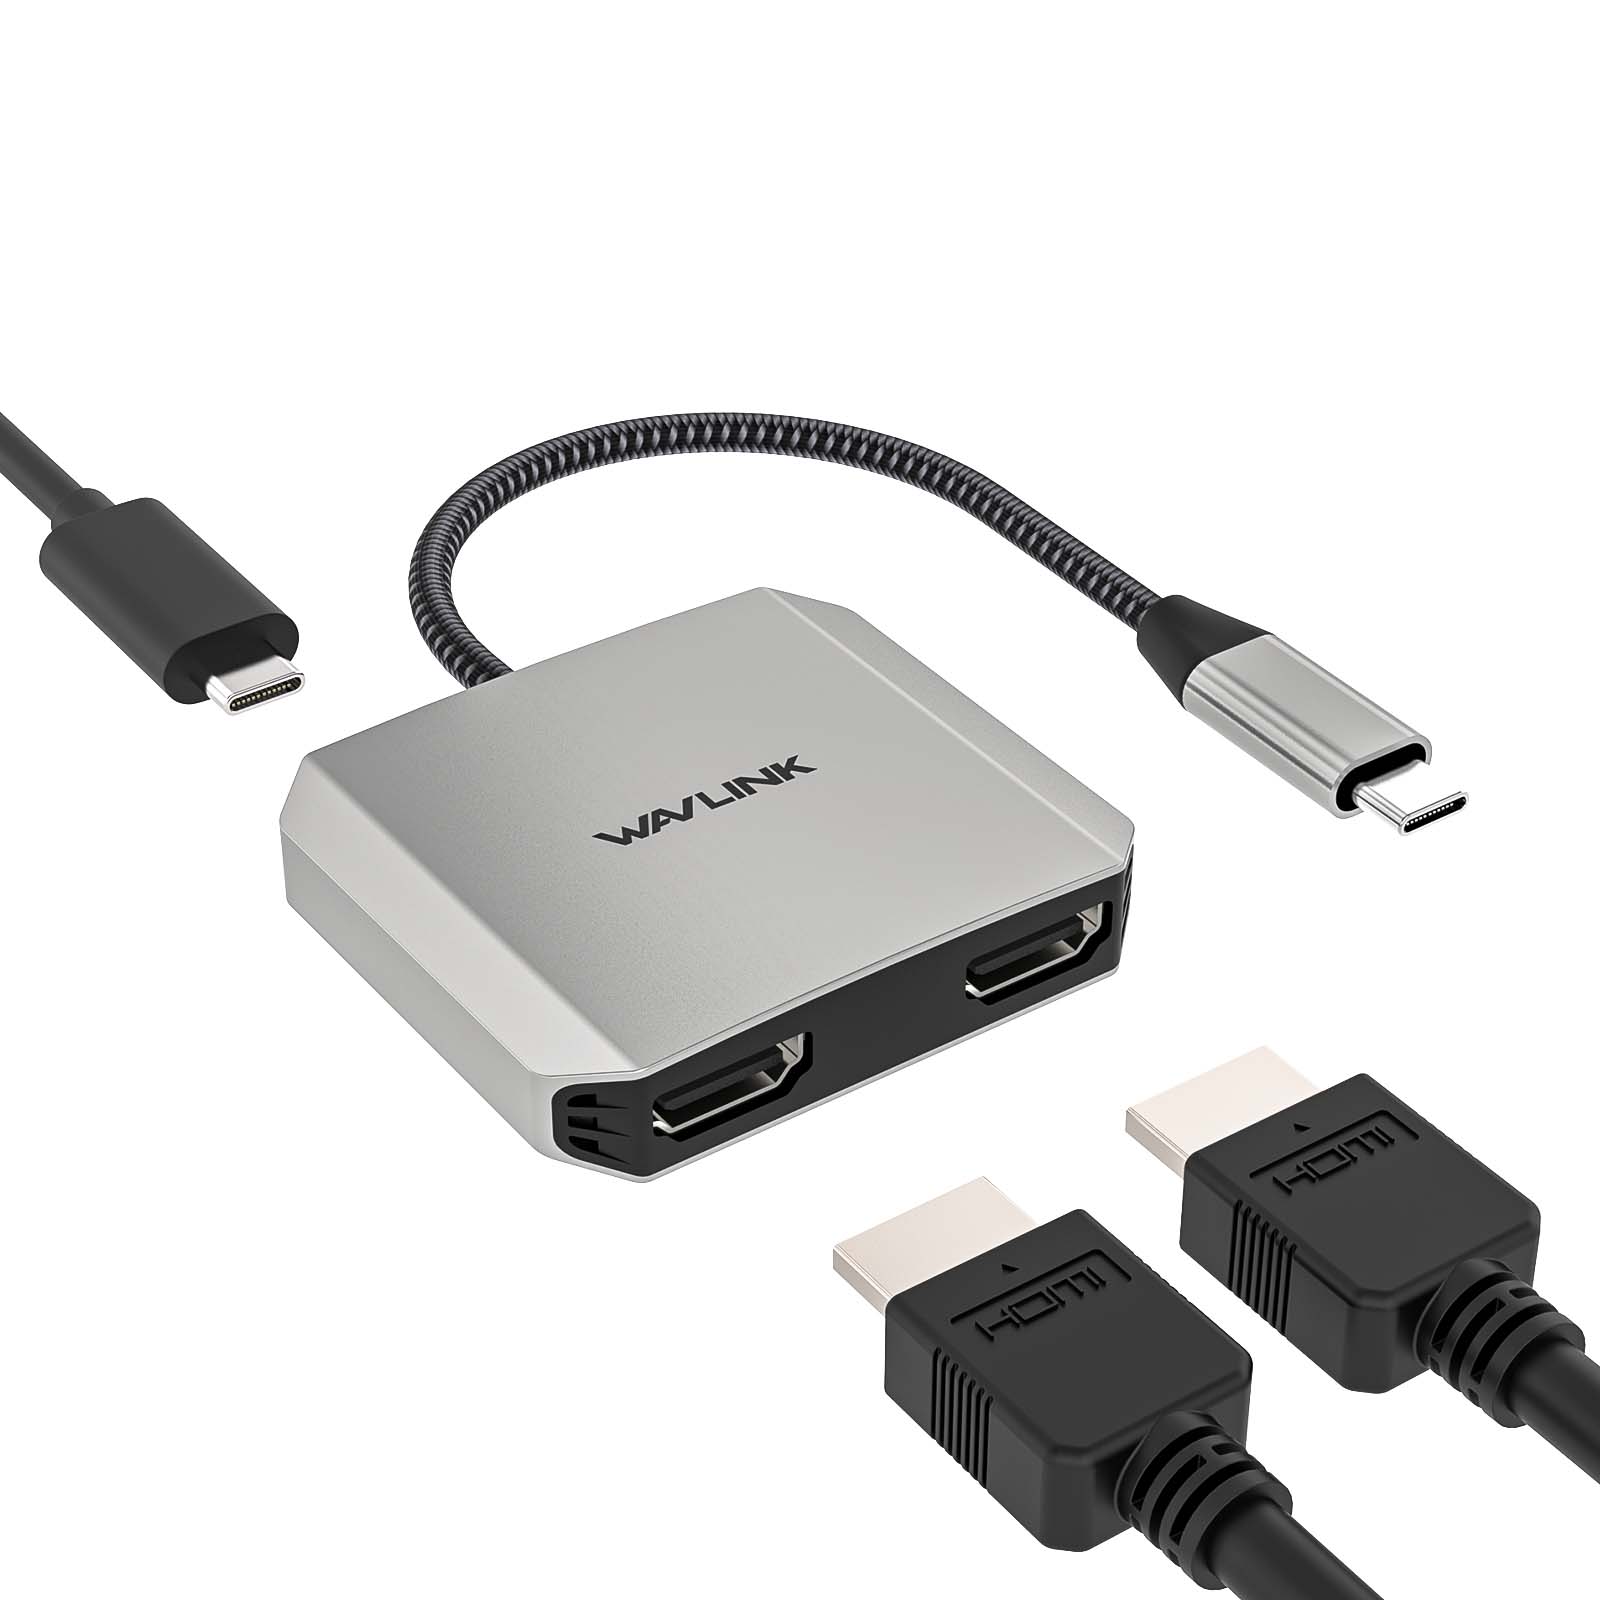 USB-C to HDMI Adapter with Power Delivery - USB-C Adapter